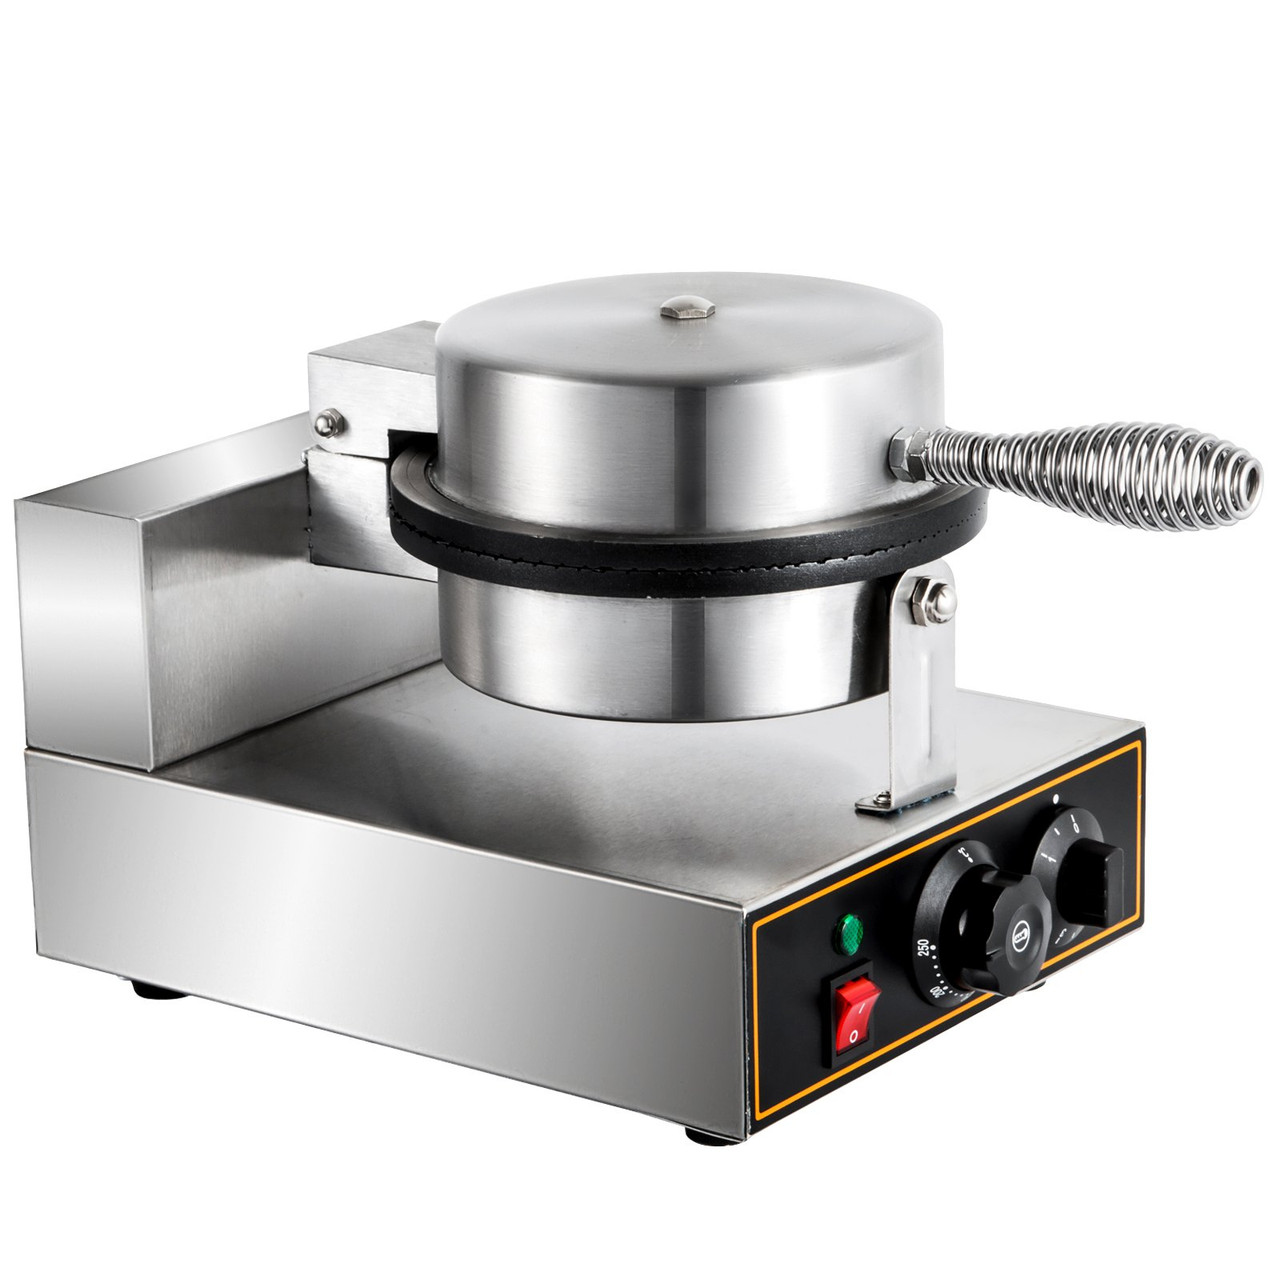 VEVOR Electric Ice Cream Cone Maker 1200W Commercial Waffle Cone Machine, 110V Stainless Steel Egg Cone Baker w/ Non-Stick Teflon Coating, Temp & Time Control for Restaurant Bakeries